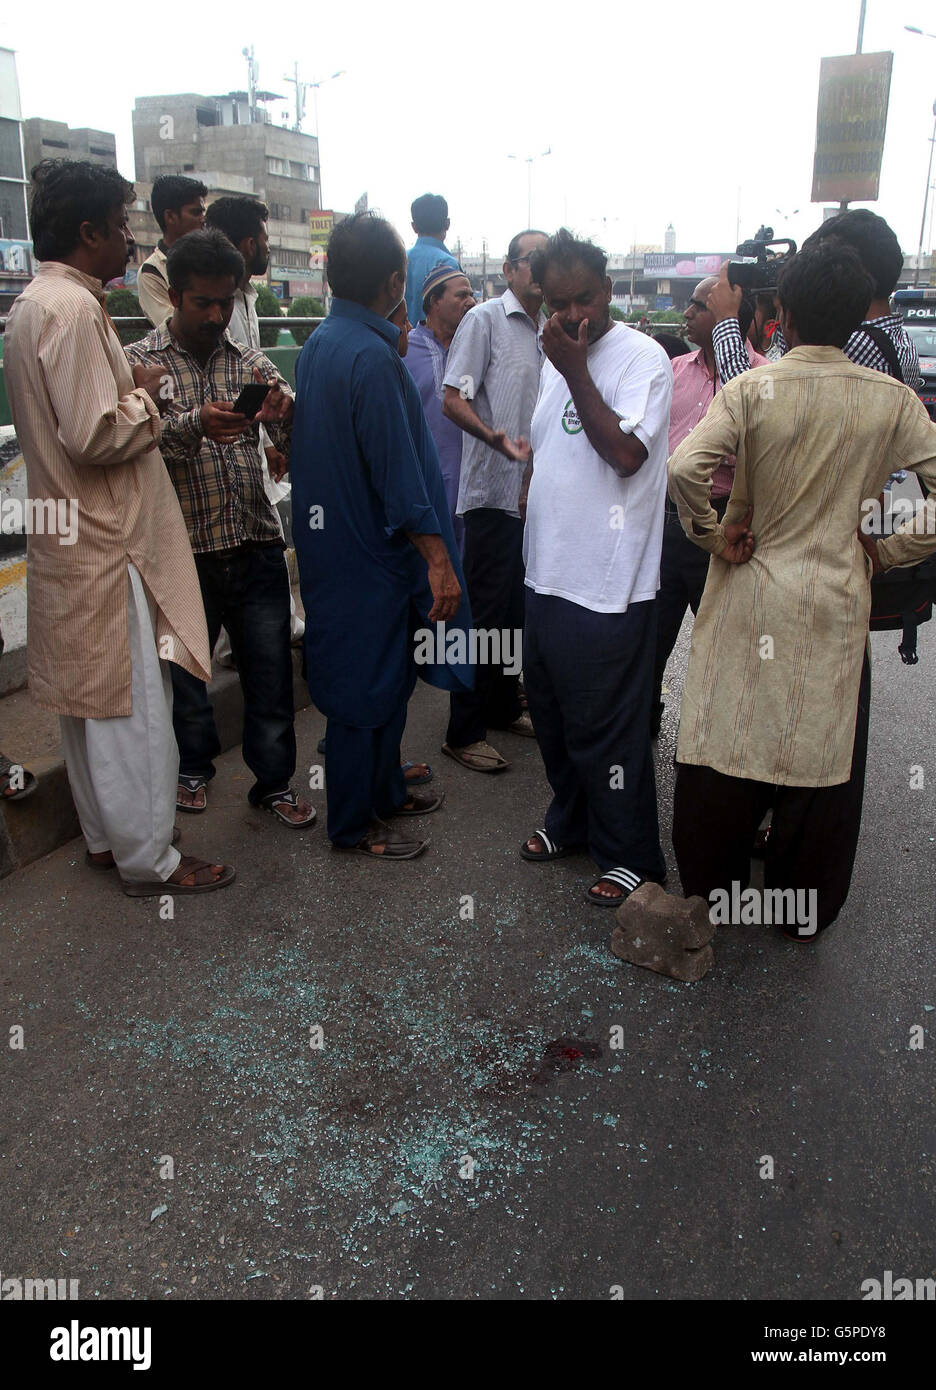 (160622) -- KARACHI, June 22, 2016 (Xinhua) -- People gather at the shootout site in southern Pakistani port city of Karachi, June 22, 2016. Three people including famous Sufi singer Amjad Sabri were killed in firing on their vehicle in Karachi on Wednesday afternoon, local media and officials said. (Xinhua/Arshad) Stock Photo